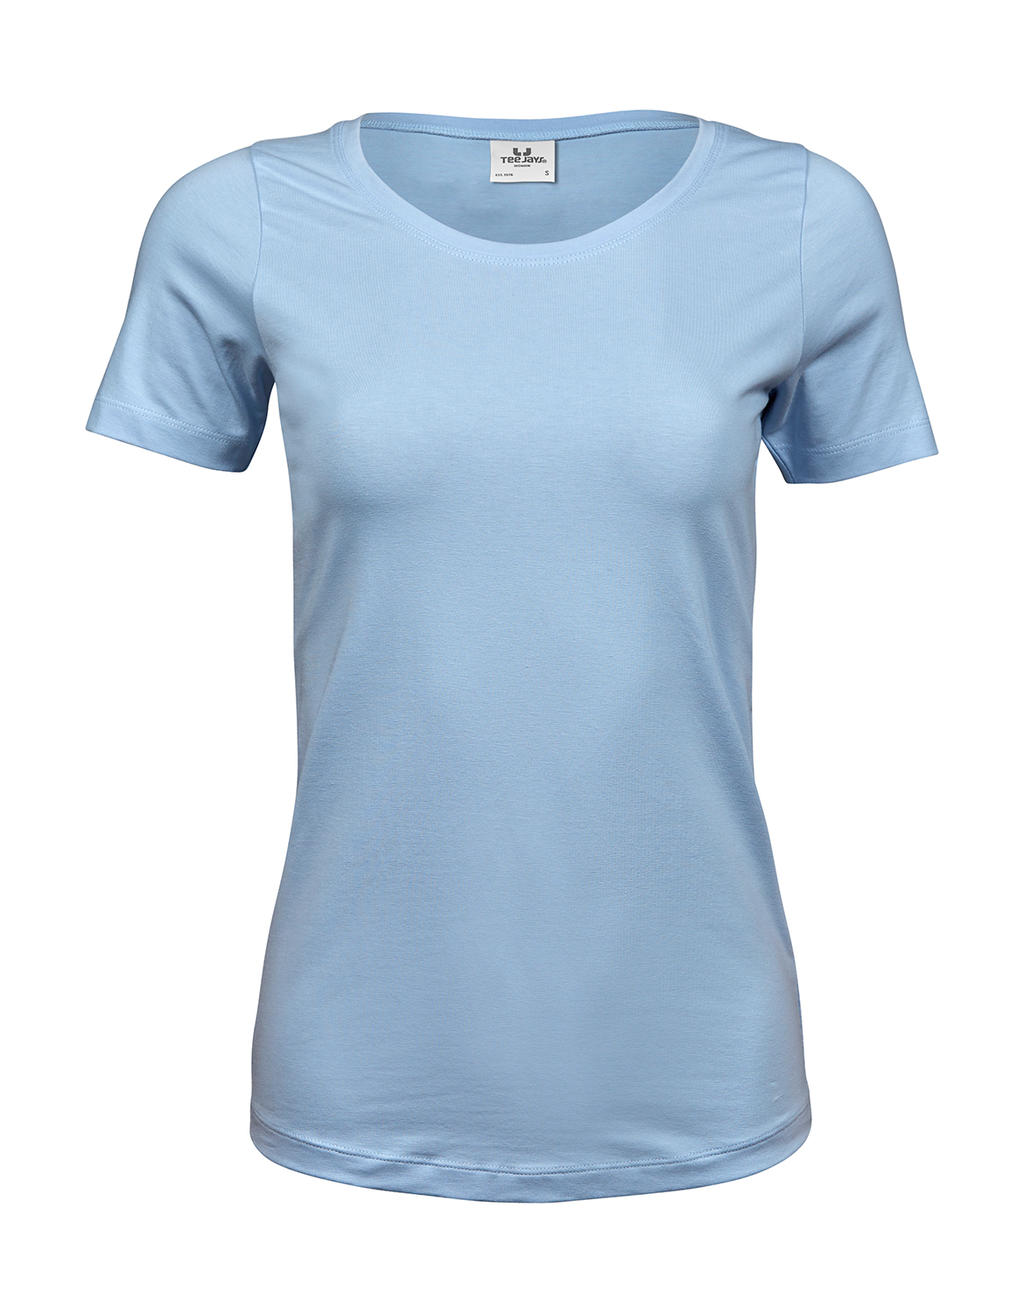  Ladies Stretch Tee in Farbe Light Blue